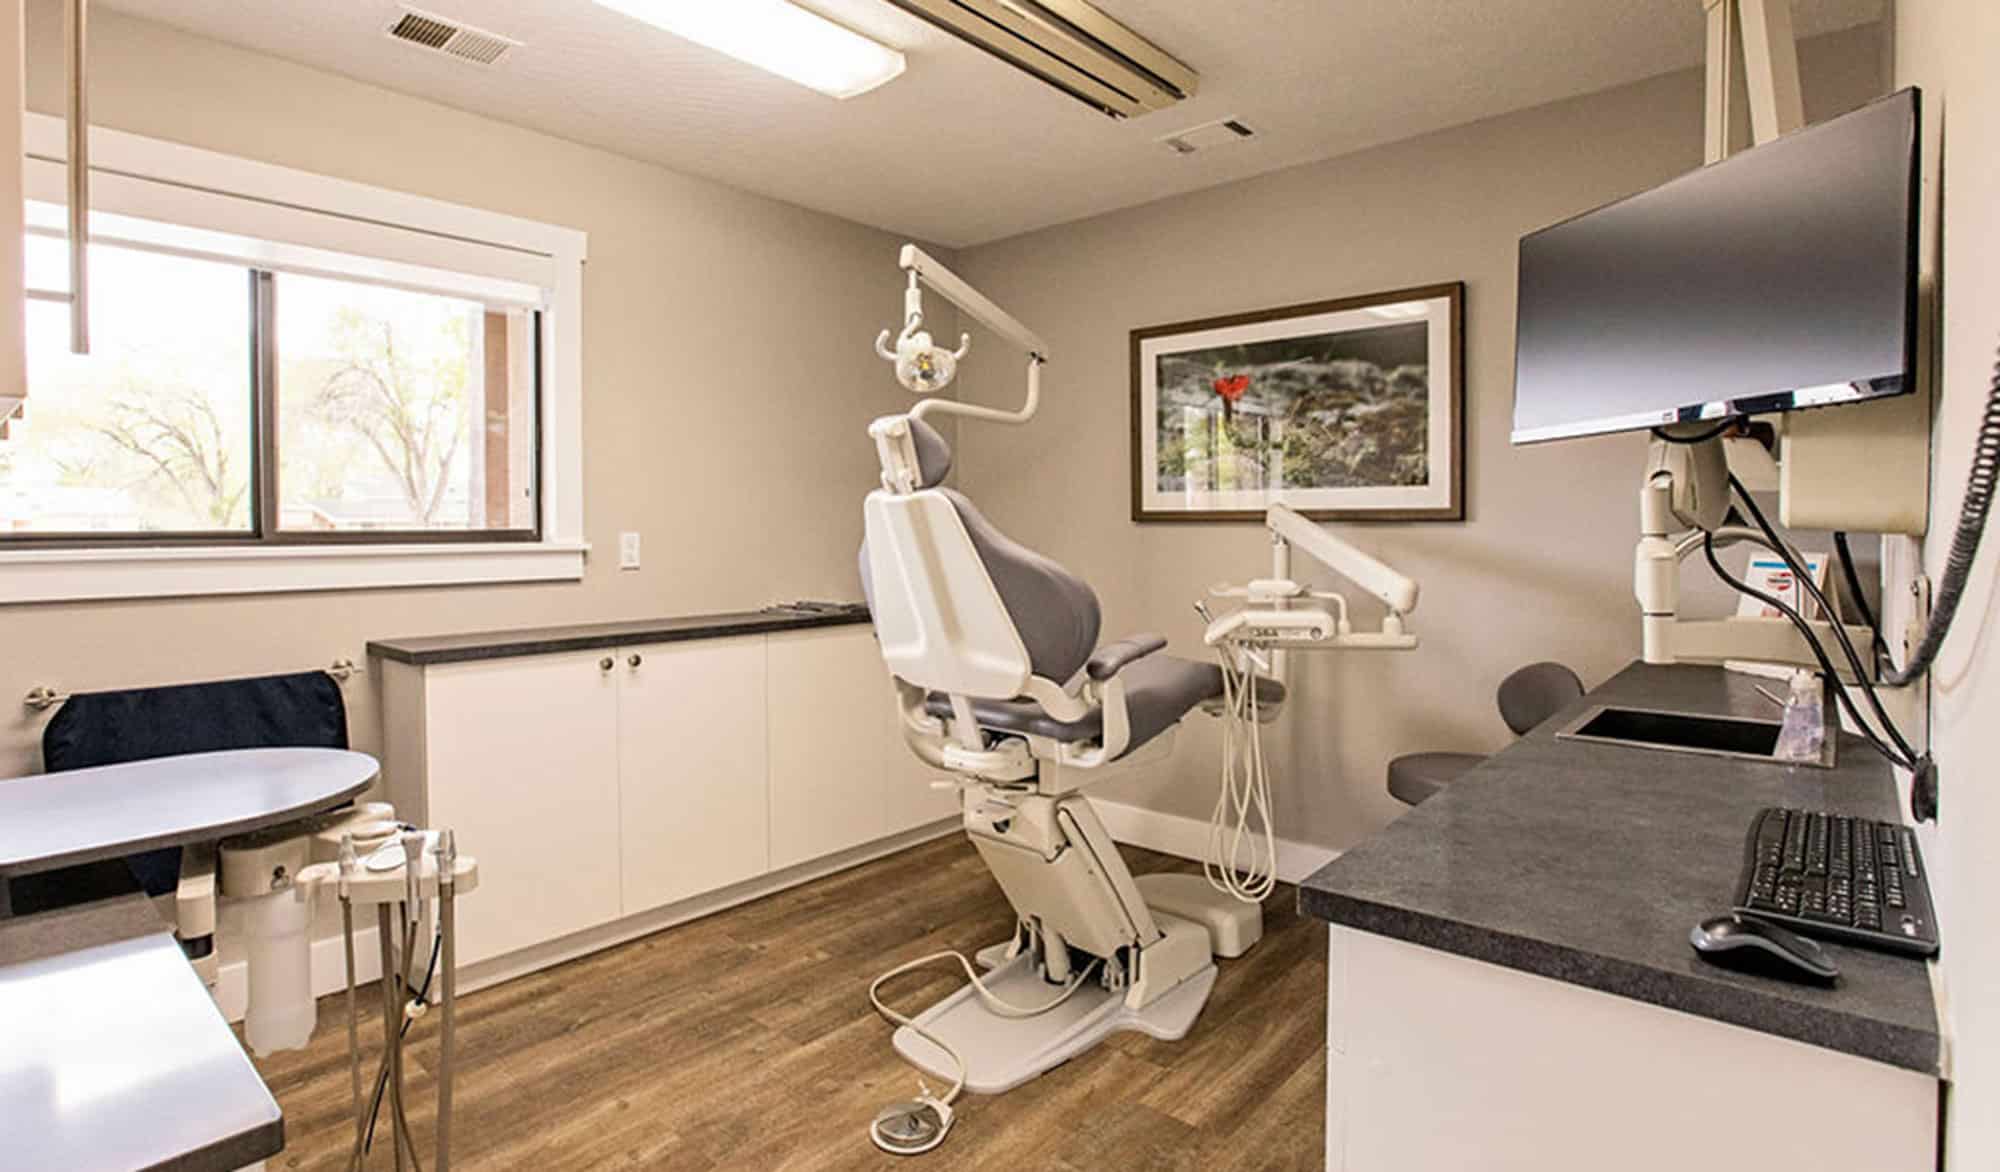 Montrose Family Dental treatment room with professional dental equipment.